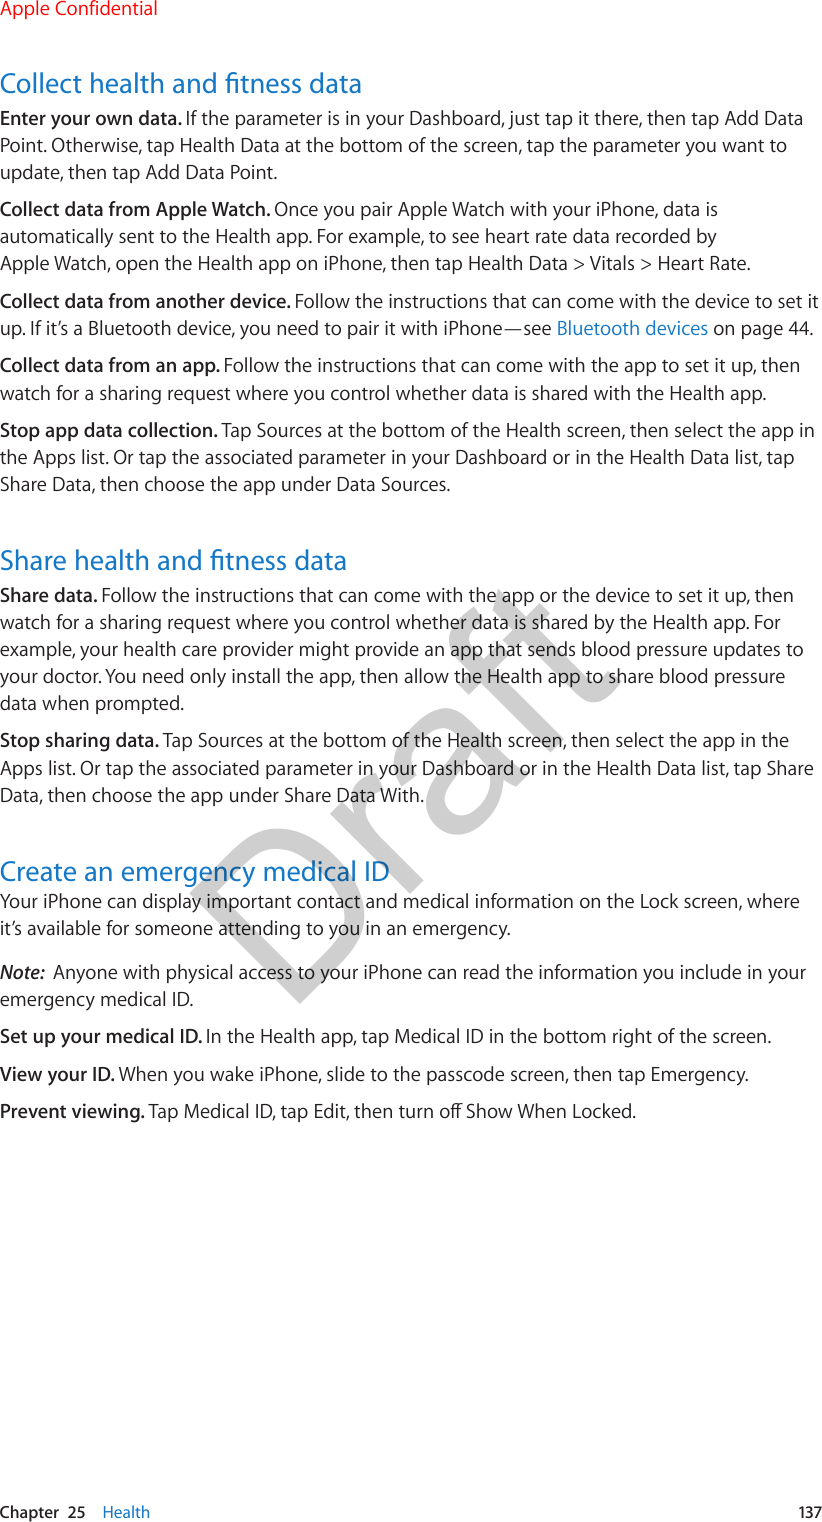 Chapter  25    Health  137Collect health and tness dataEnter your own data. If the parameter is in your Dashboard, just tap it there, then tap Add Data Point. Otherwise, tap Health Data at the bottom of the screen, tap the parameter you want to update, then tap Add Data Point.Collect data from Apple Watch. Once you pair Apple Watch with your iPhone, data is automatically sent to the Health app. For example, to see heart rate data recorded by Apple Watch, open the Health app on iPhone, then tap Health Data &gt; Vitals &gt; Heart Rate.Collect data from another device. Follow the instructions that can come with the device to set it up. If it’s a Bluetooth device, you need to pair it with iPhone—see Bluetooth devices on page 44.Collect data from an app. Follow the instructions that can come with the app to set it up, then watch for a sharing request where you control whether data is shared with the Health app.Stop app data collection. Tap Sources at the bottom of the Health screen, then select the app in the Apps list. Or tap the associated parameter in your Dashboard or in the Health Data list, tap Share Data, then choose the app under Data Sources.Share health and tness dataShare data. Follow the instructions that can come with the app or the device to set it up, then watch for a sharing request where you control whether data is shared by the Health app. For example, your health care provider might provide an app that sends blood pressure updates to your doctor. You need only install the app, then allow the Health app to share blood pressure data when prompted.Stop sharing data. Tap Sources at the bottom of the Health screen, then select the app in the Apps list. Or tap the associated parameter in your Dashboard or in the Health Data list, tap Share Data, then choose the app under Share Data With.Create an emergency medical IDYour iPhone can display important contact and medical information on the Lock screen, where it’s available for someone attending to you in an emergency.Note:  Anyone with physical access to your iPhone can read the information you include in your emergency medical ID.Set up your medical ID. In the Health app, tap Medical ID in the bottom right of the screen. View your ID. When you wake iPhone, slide to the passcode screen, then tap Emergency.Prevent viewing. Tap Medical ID, tap Edit, then turn o Show When Locked.Apple ConfidentialDraft